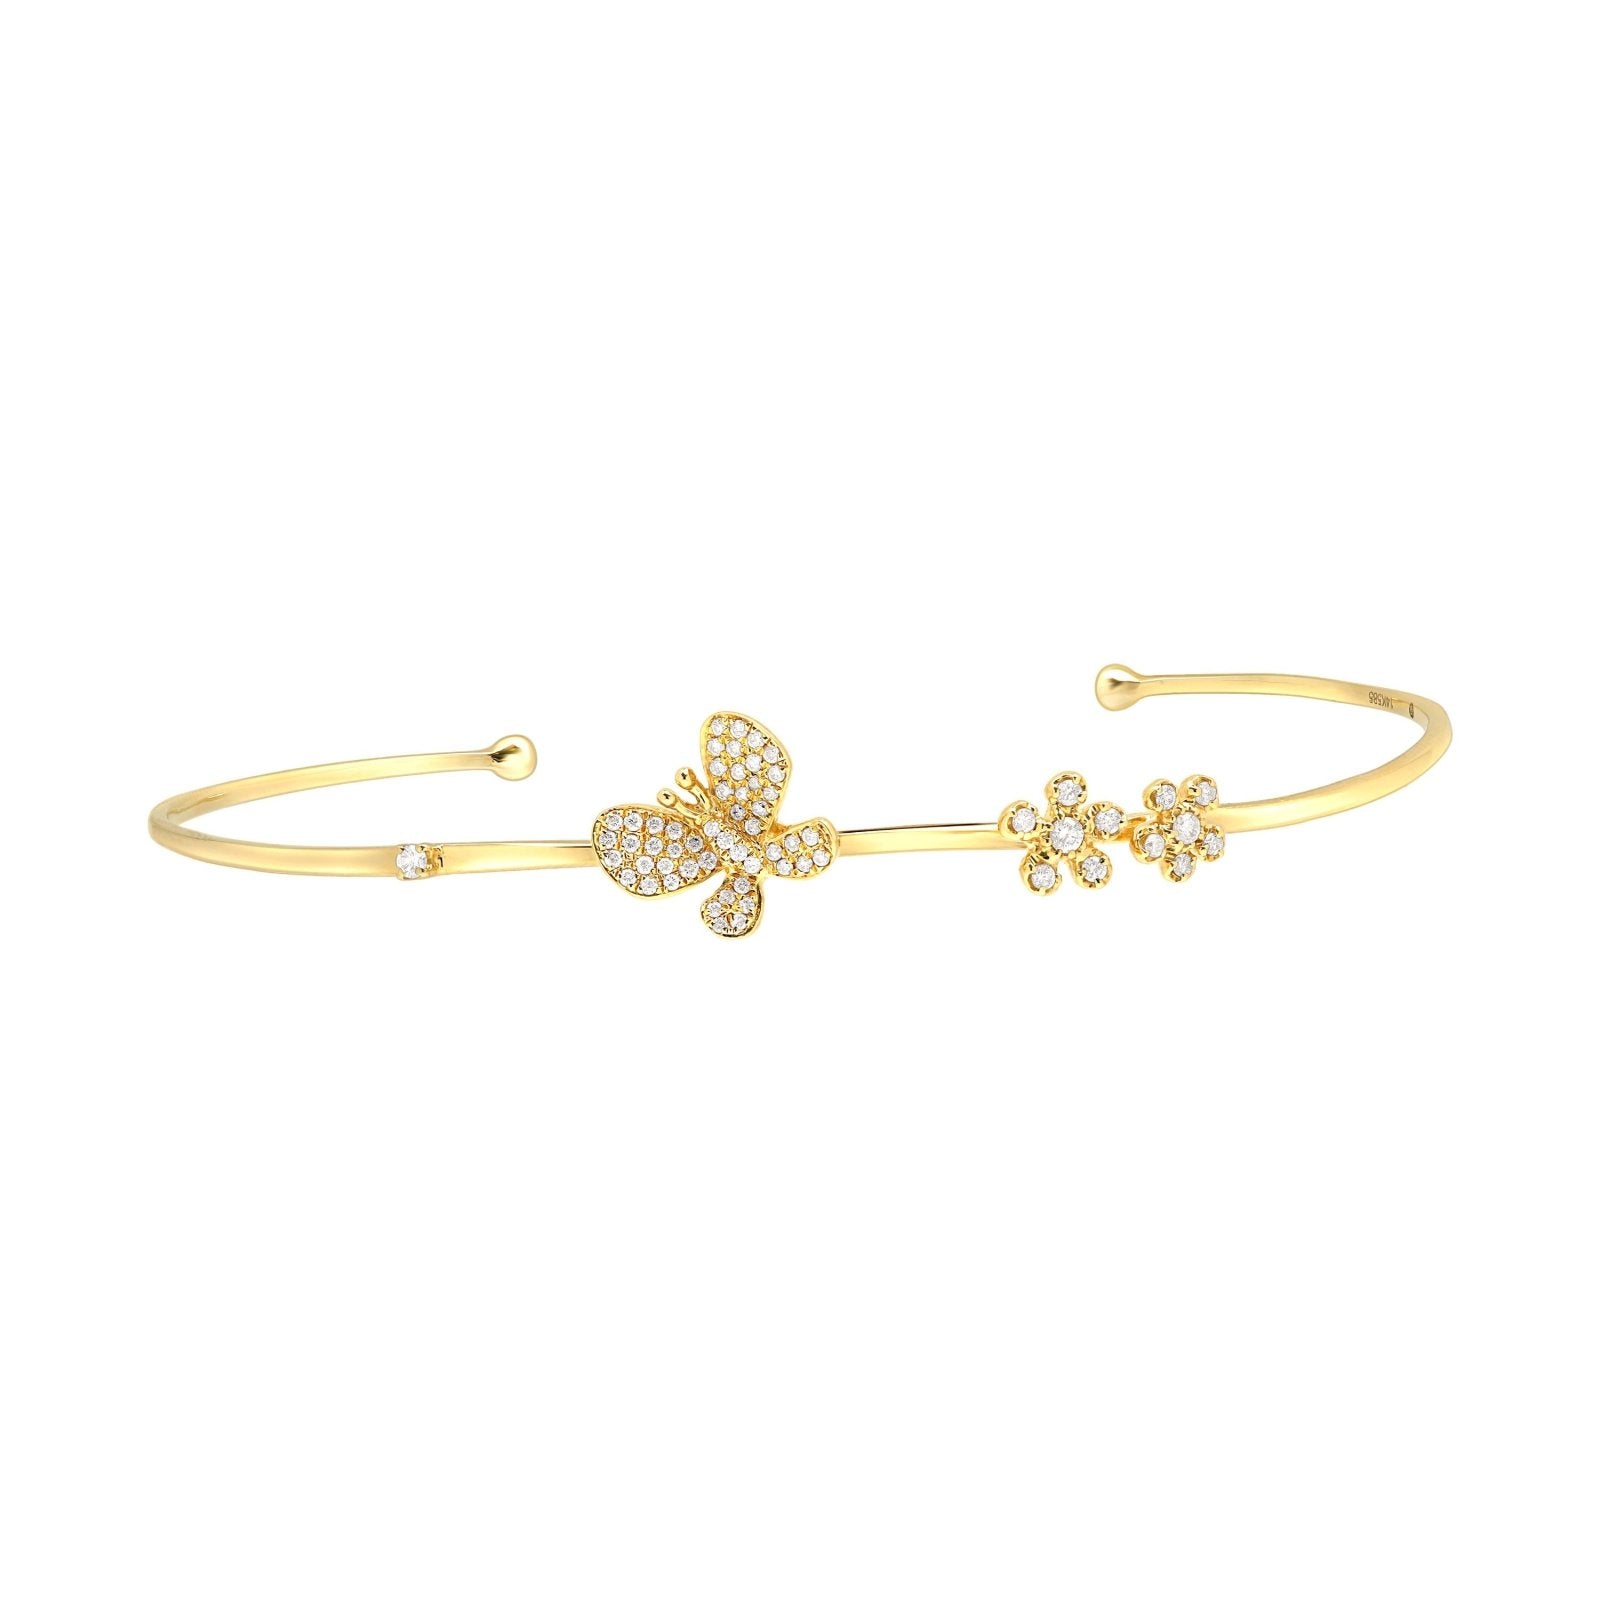 Diamond Butterfly and Flowers Garden Party Cuff Bracelets Estella Collection #product_description# 17189 14k Diamond Flower Jewelry #tag4# #tag5# #tag6# #tag7# #tag8# #tag9# #tag10#